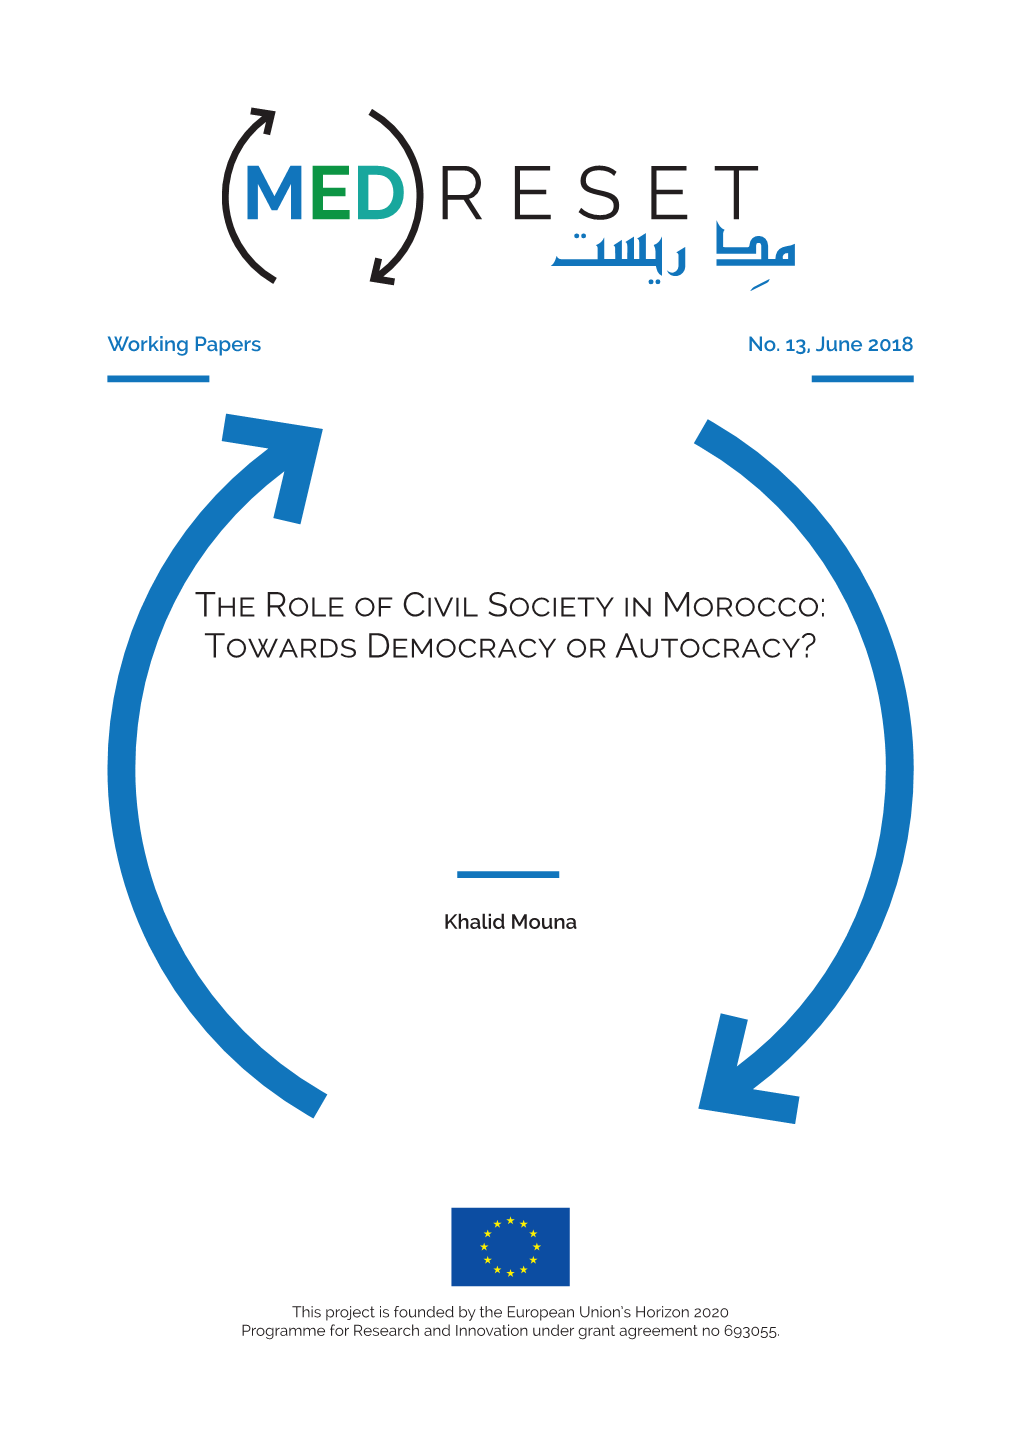 The Role of Civil Society in Morocco: Towards Democracy Or Autocracy?